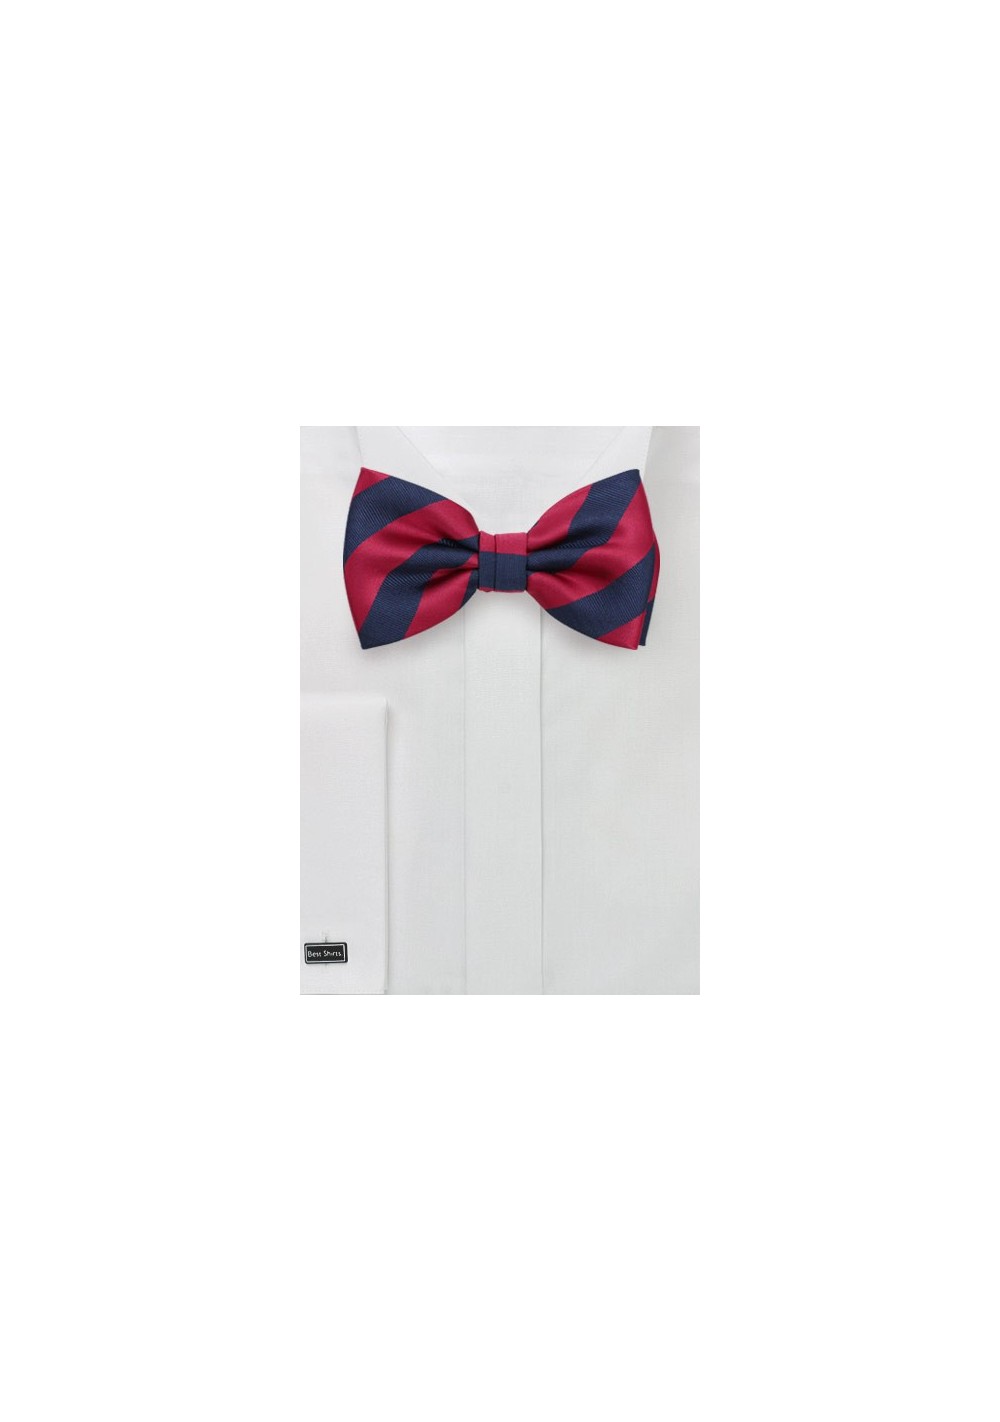 Navy and Red Striped Bow Tie